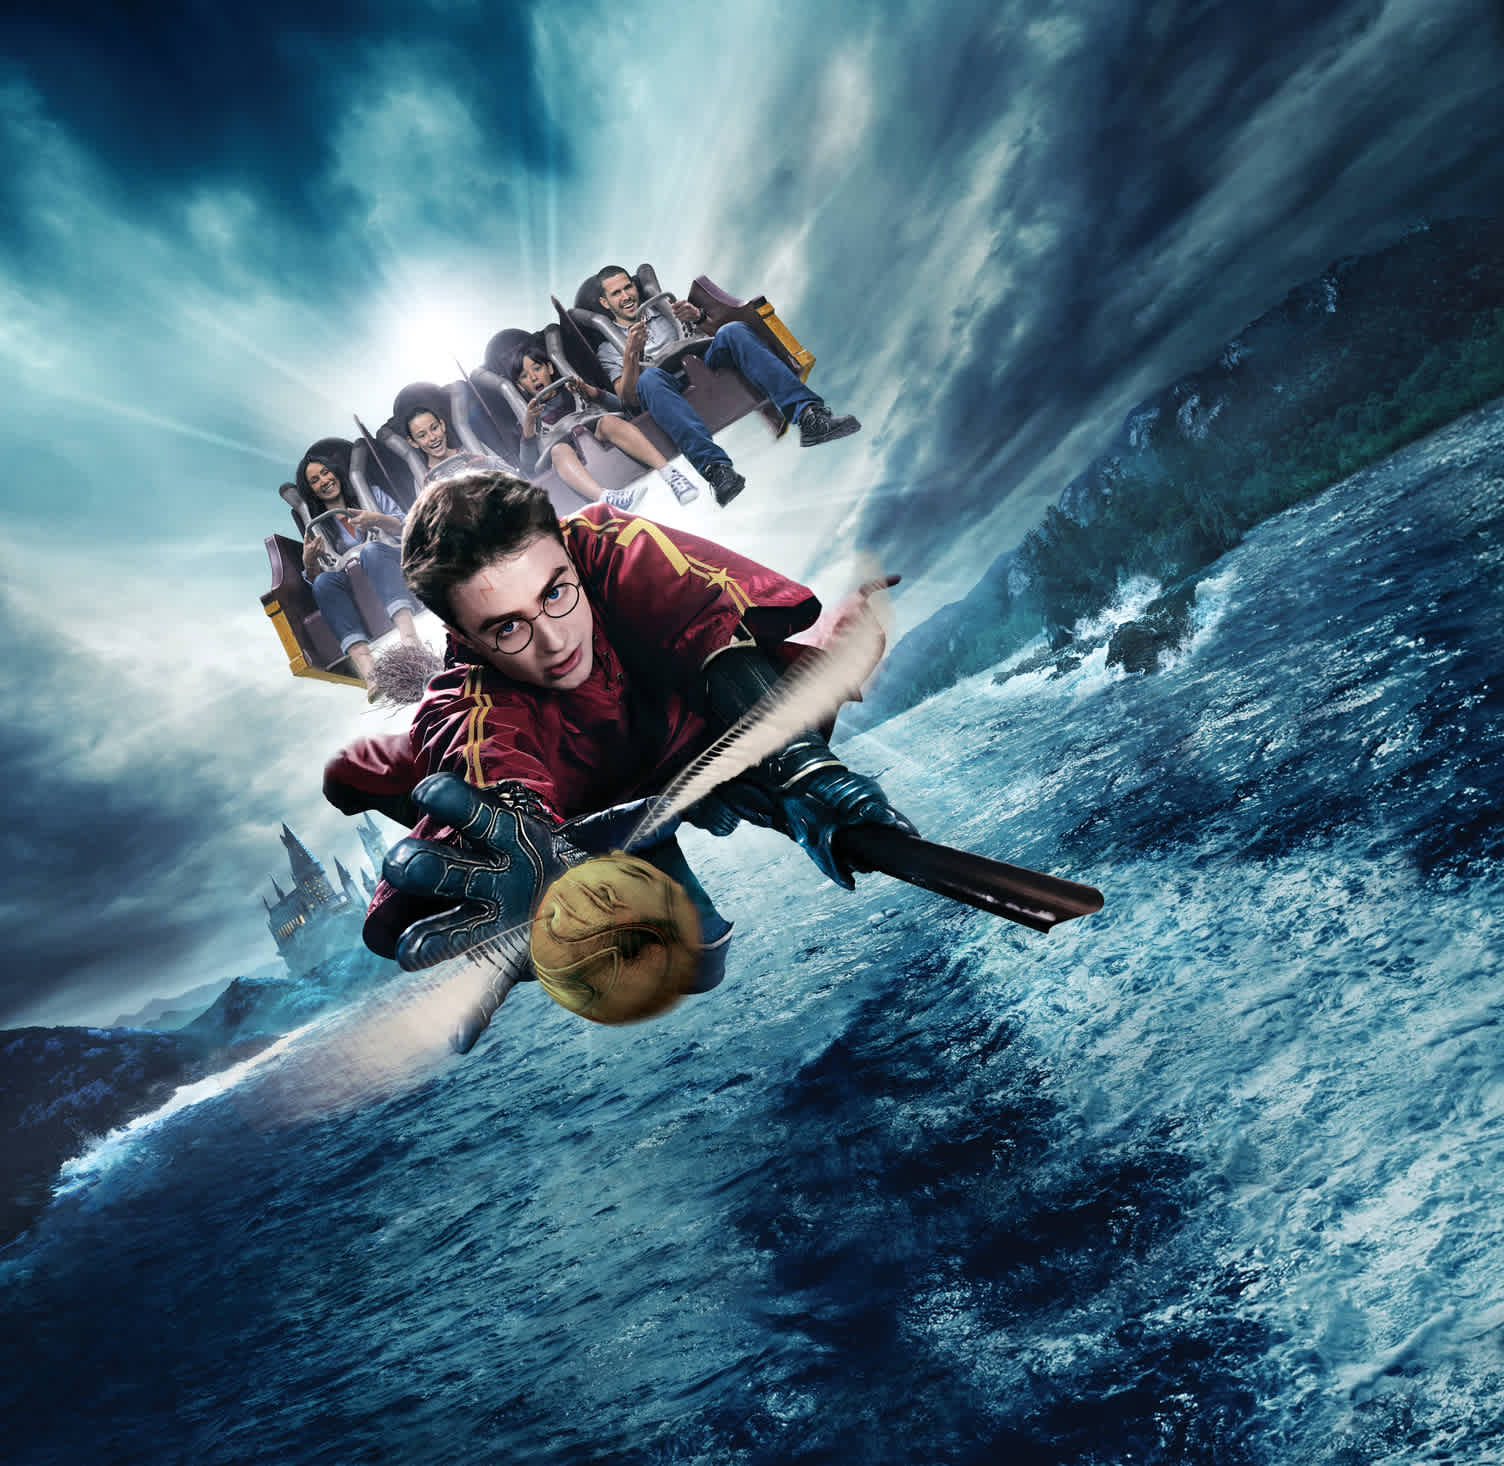 Image displays a stylized, fantasy scene. A person in the foreground appears to be flying on a broomstick over a body of water, clutching a ball; determination on their face. They wear a red and gold sports uniform. Behind, a group of people can be seen seated on chairs, airborne, and various expressions adorn their faces. In the background, a castle-like structure rests atop distant cliffs under dynamic, cloudy skies.